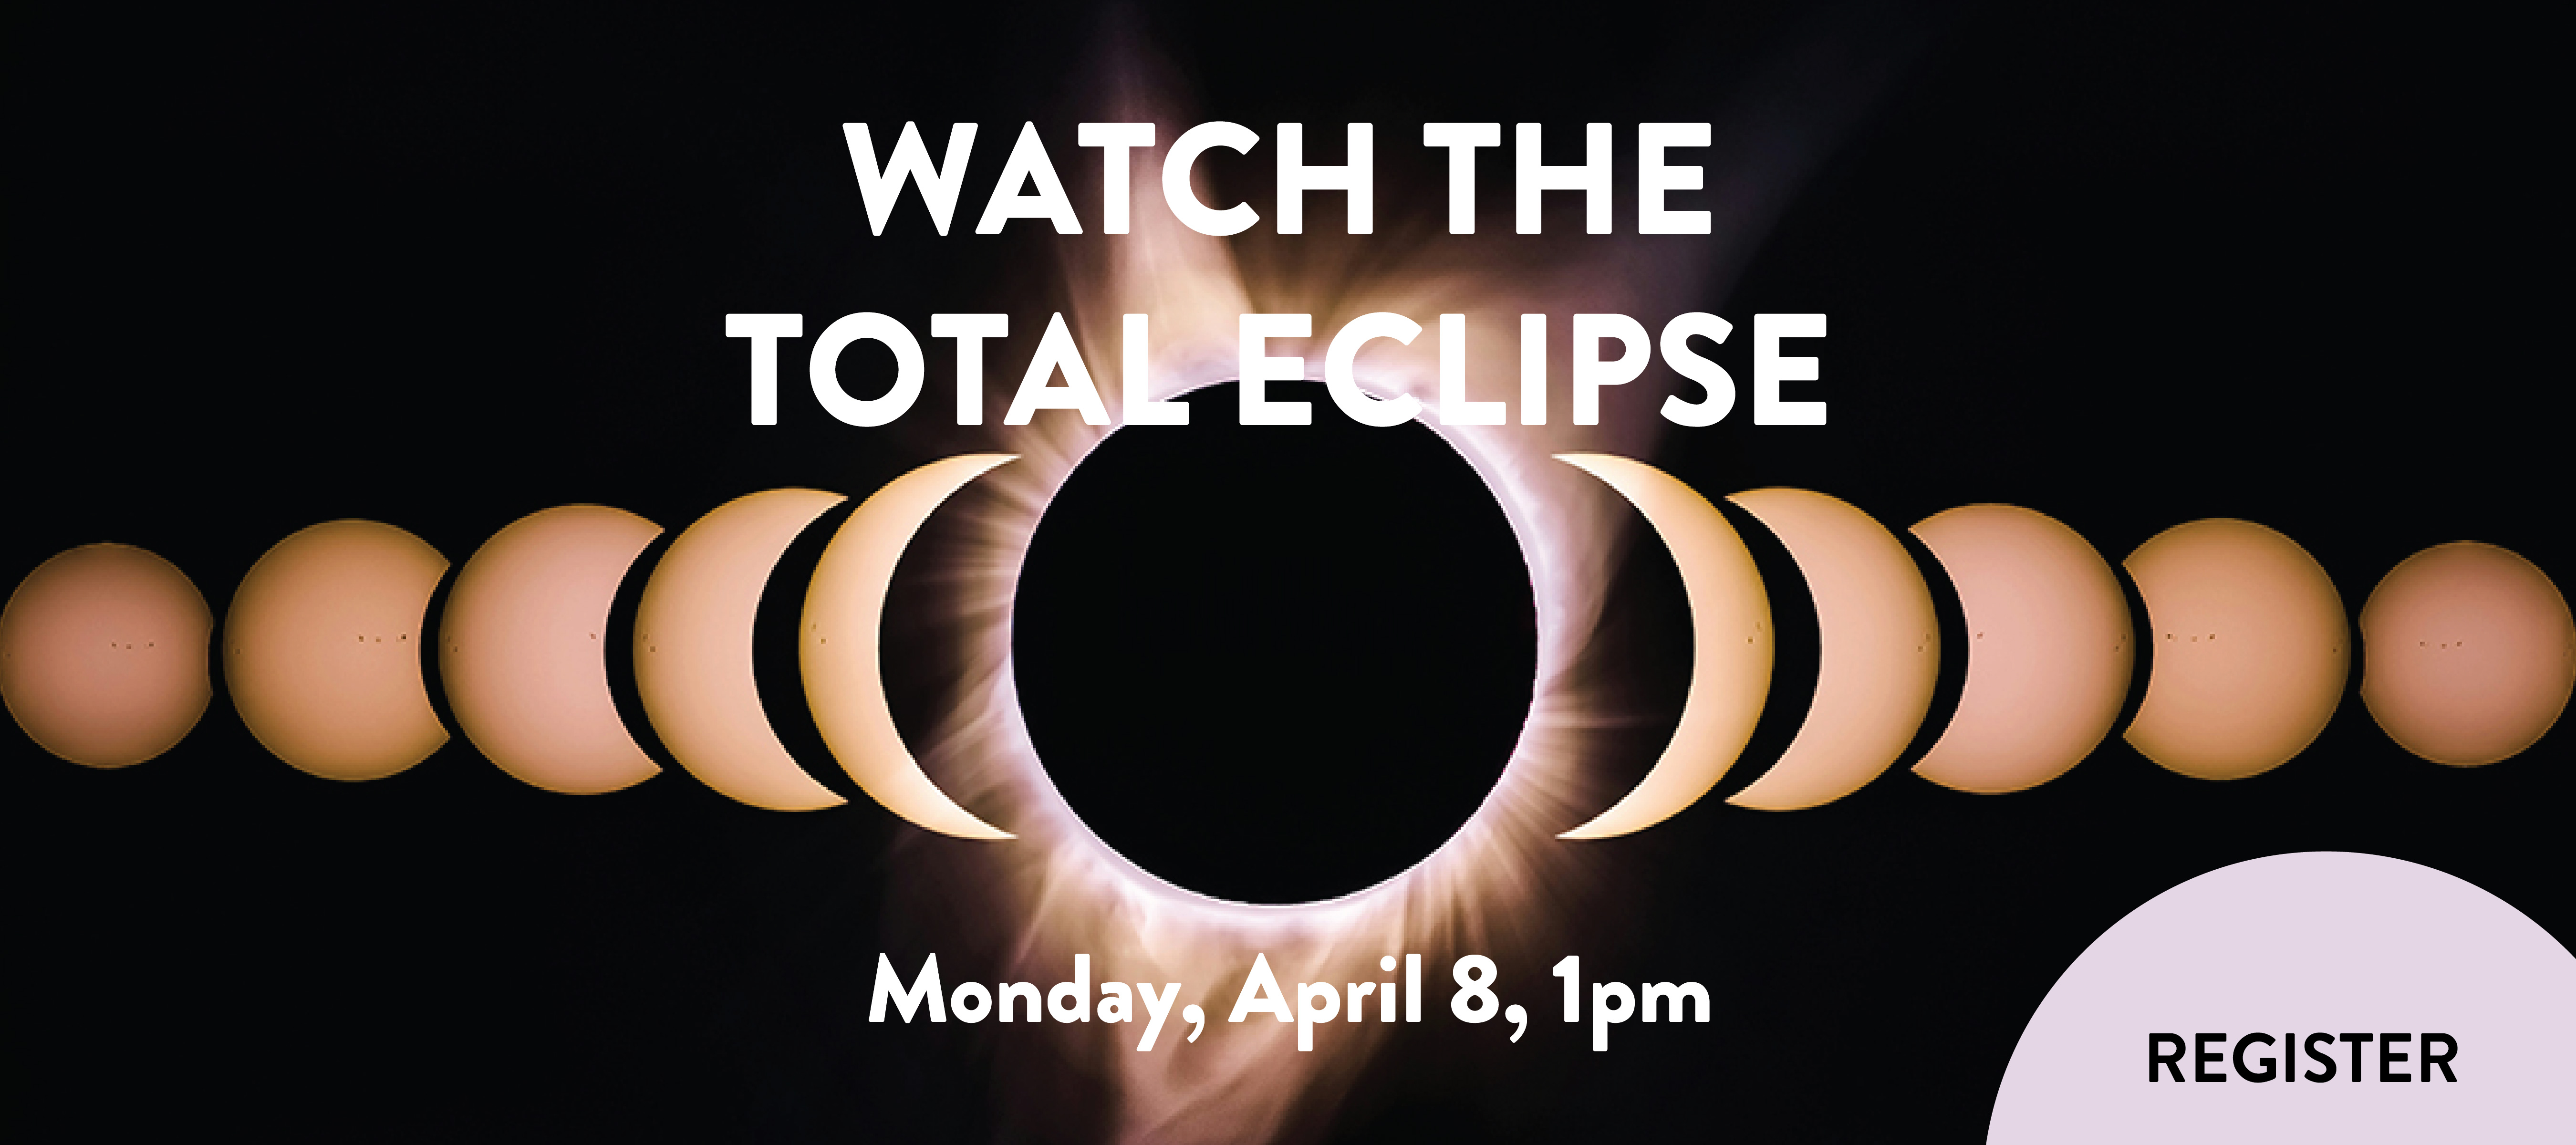 phpl, Prospect Heights Public Library, Watch the Total Eclipse, Youth, Tween, Teen, Adult